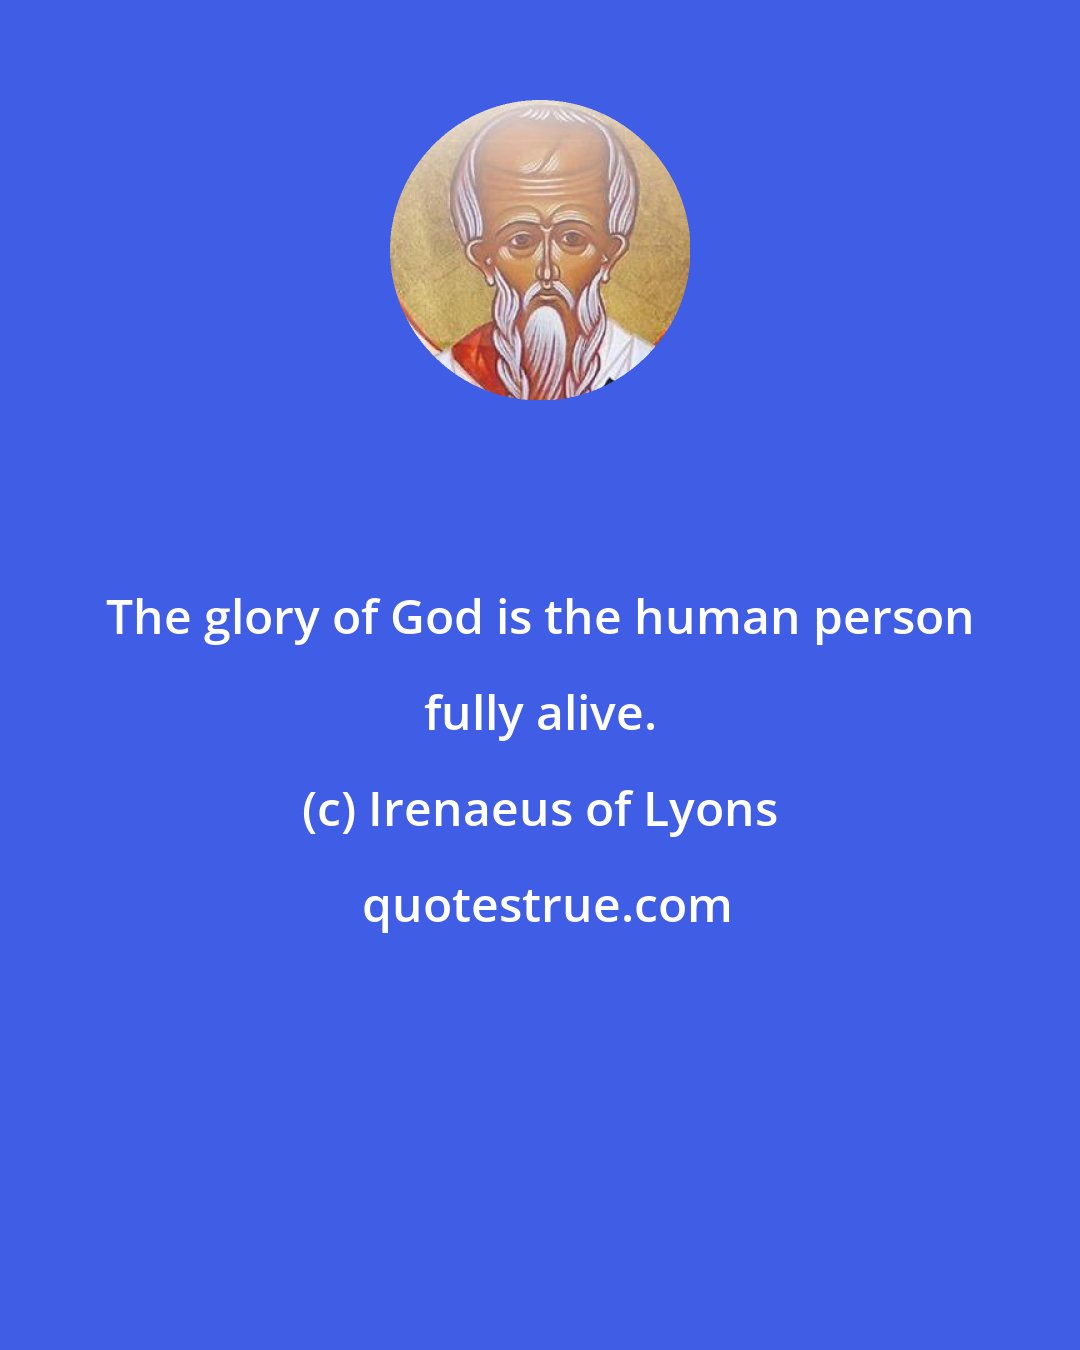 Irenaeus of Lyons: The glory of God is the human person fully alive.